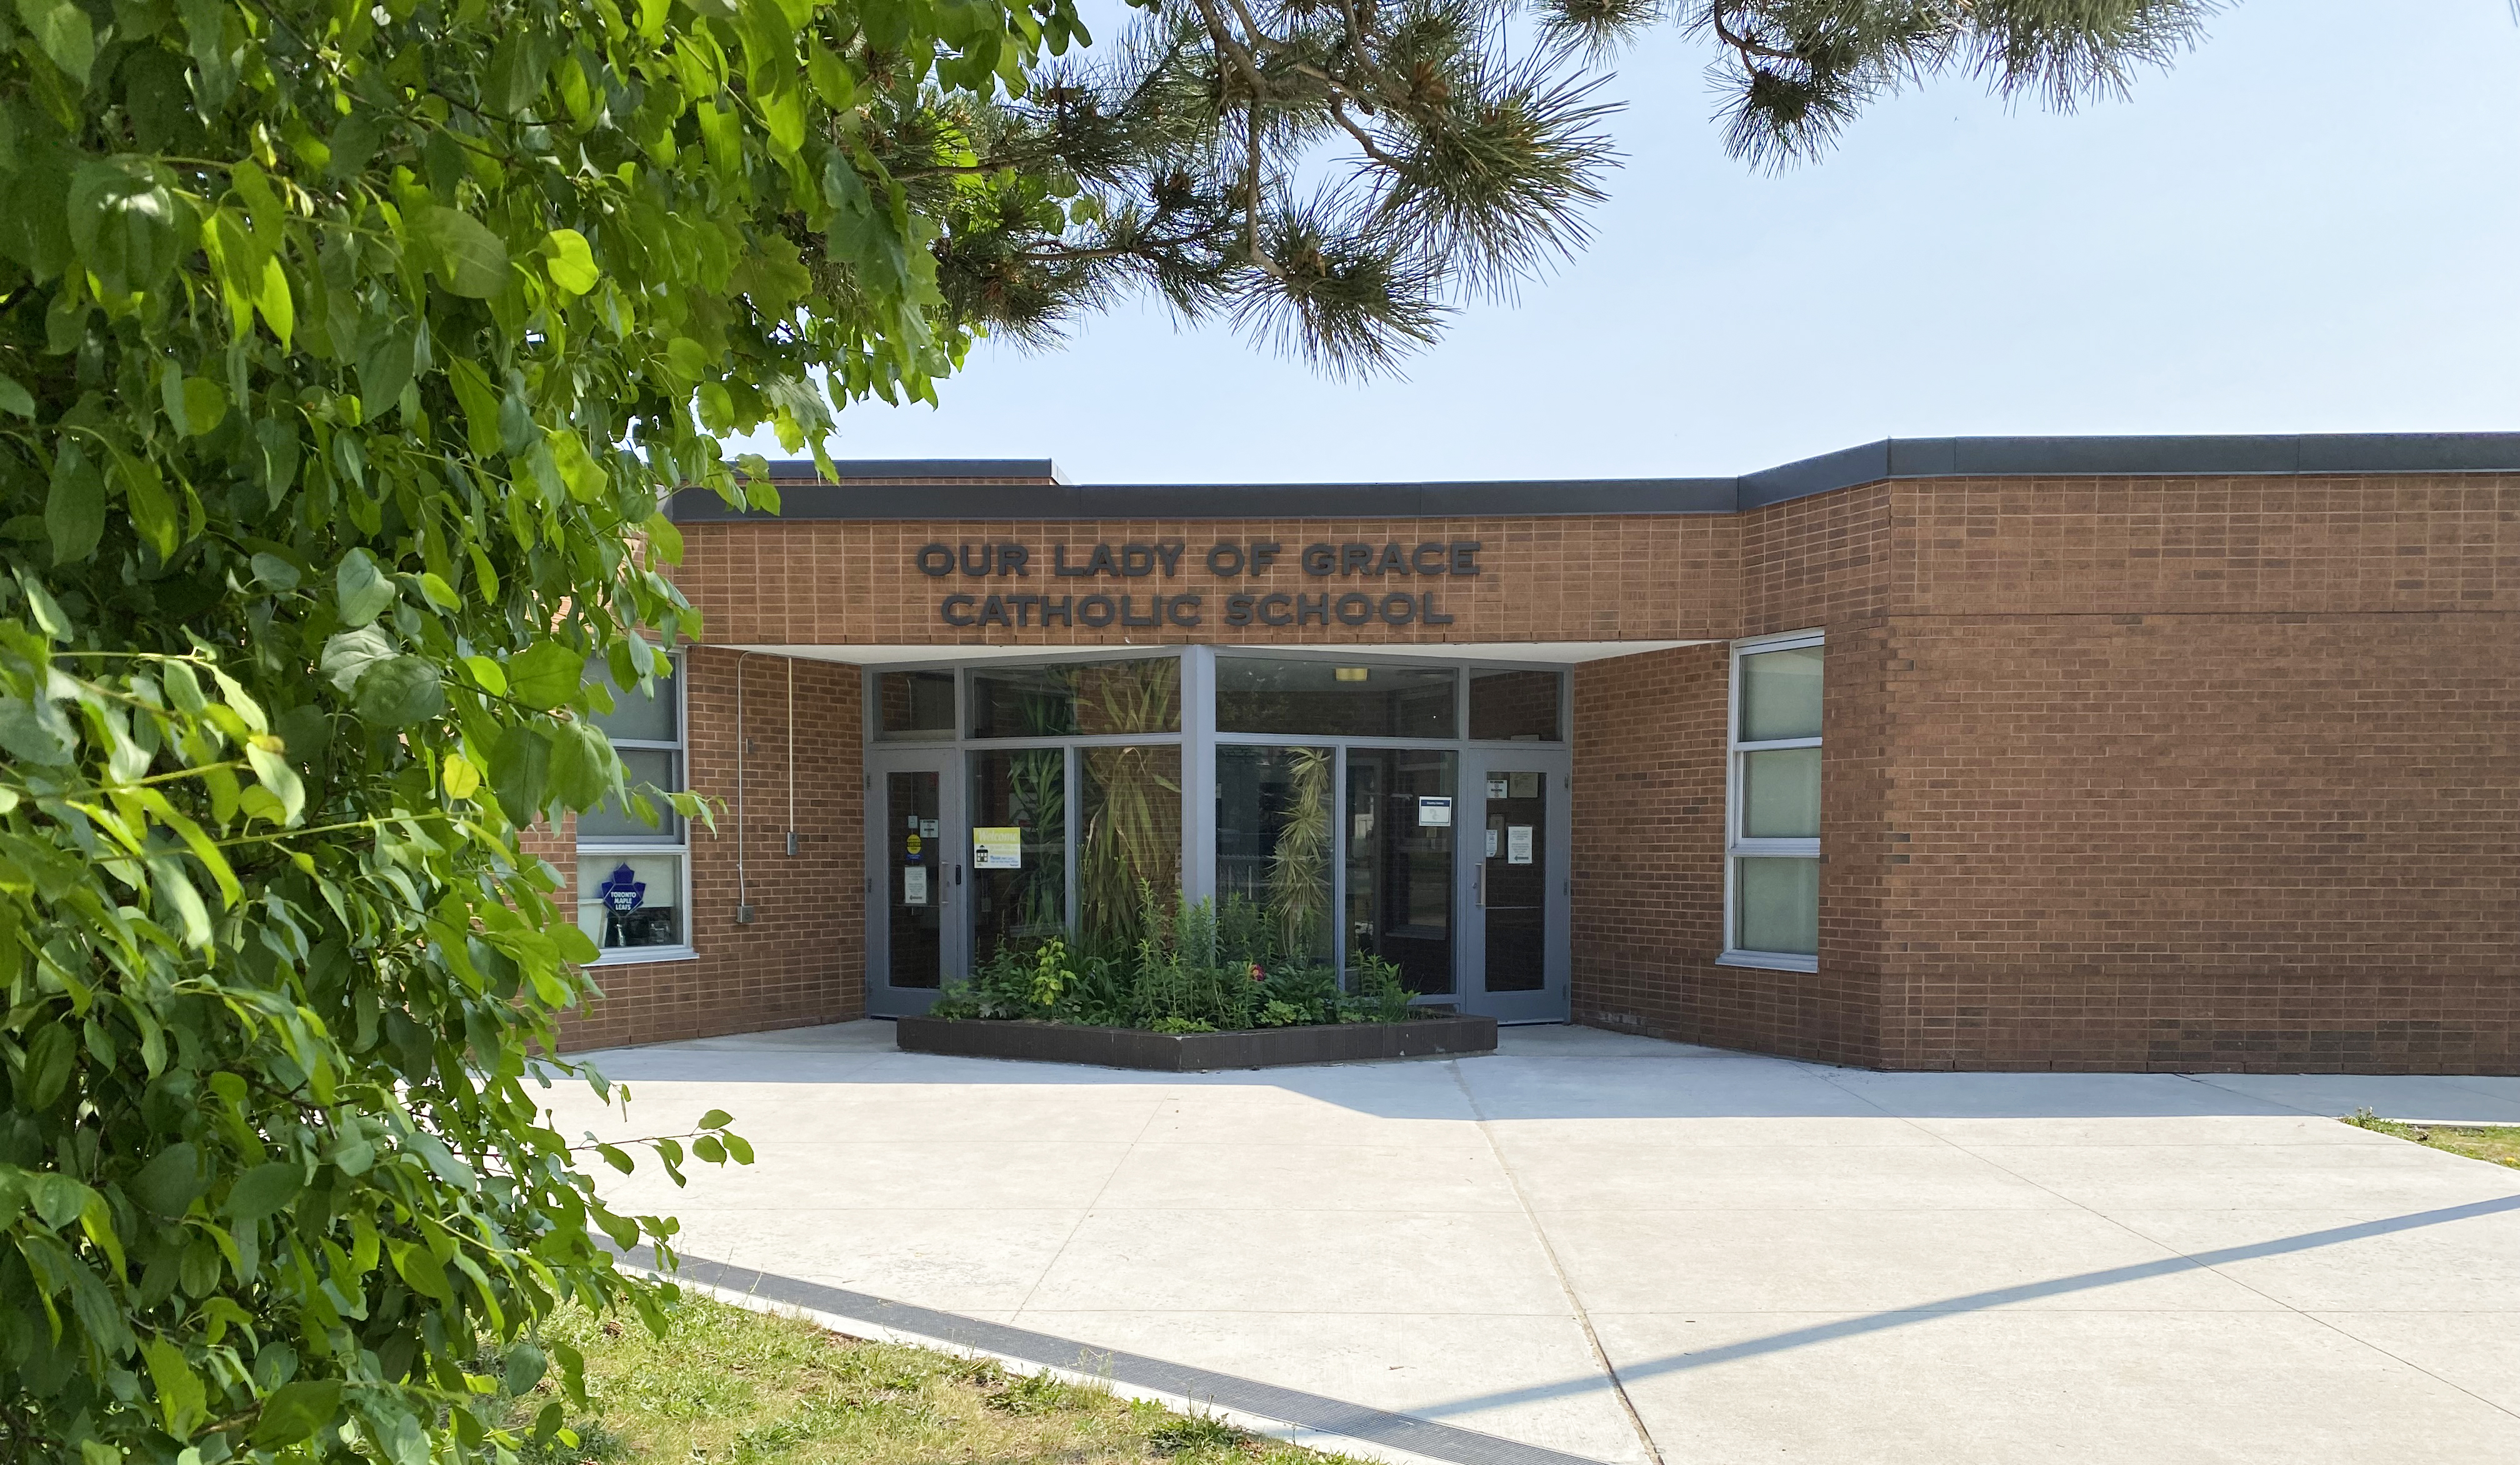 The front of the Our Lady of Grace Catholic School building